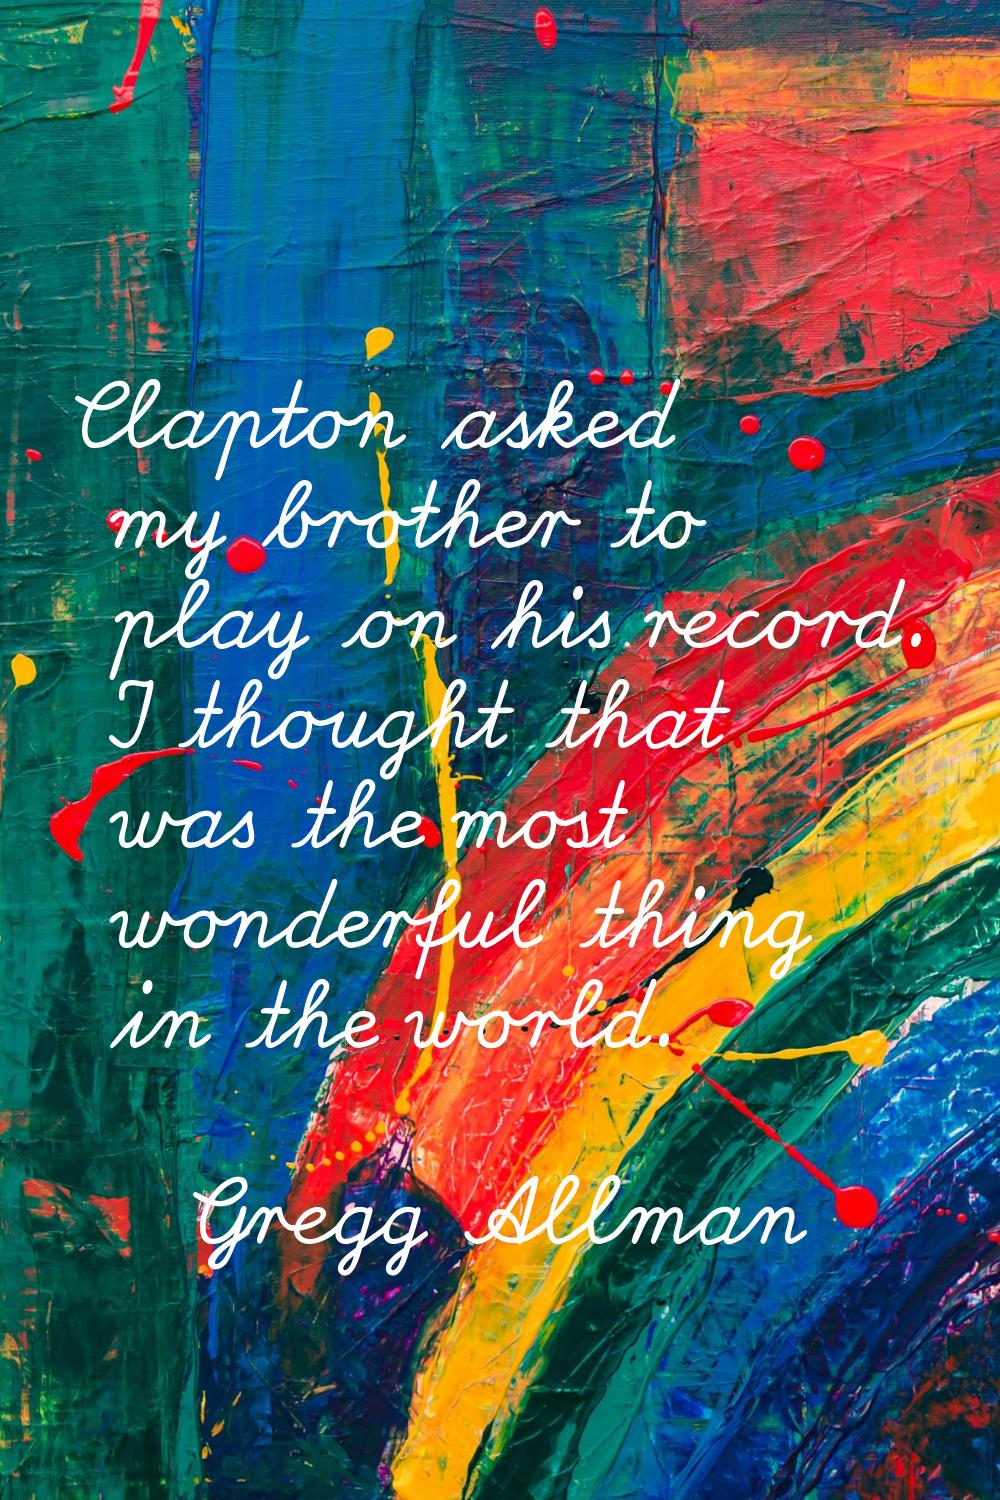 Clapton asked my brother to play on his record. I thought that was the most wonderful thing in the 